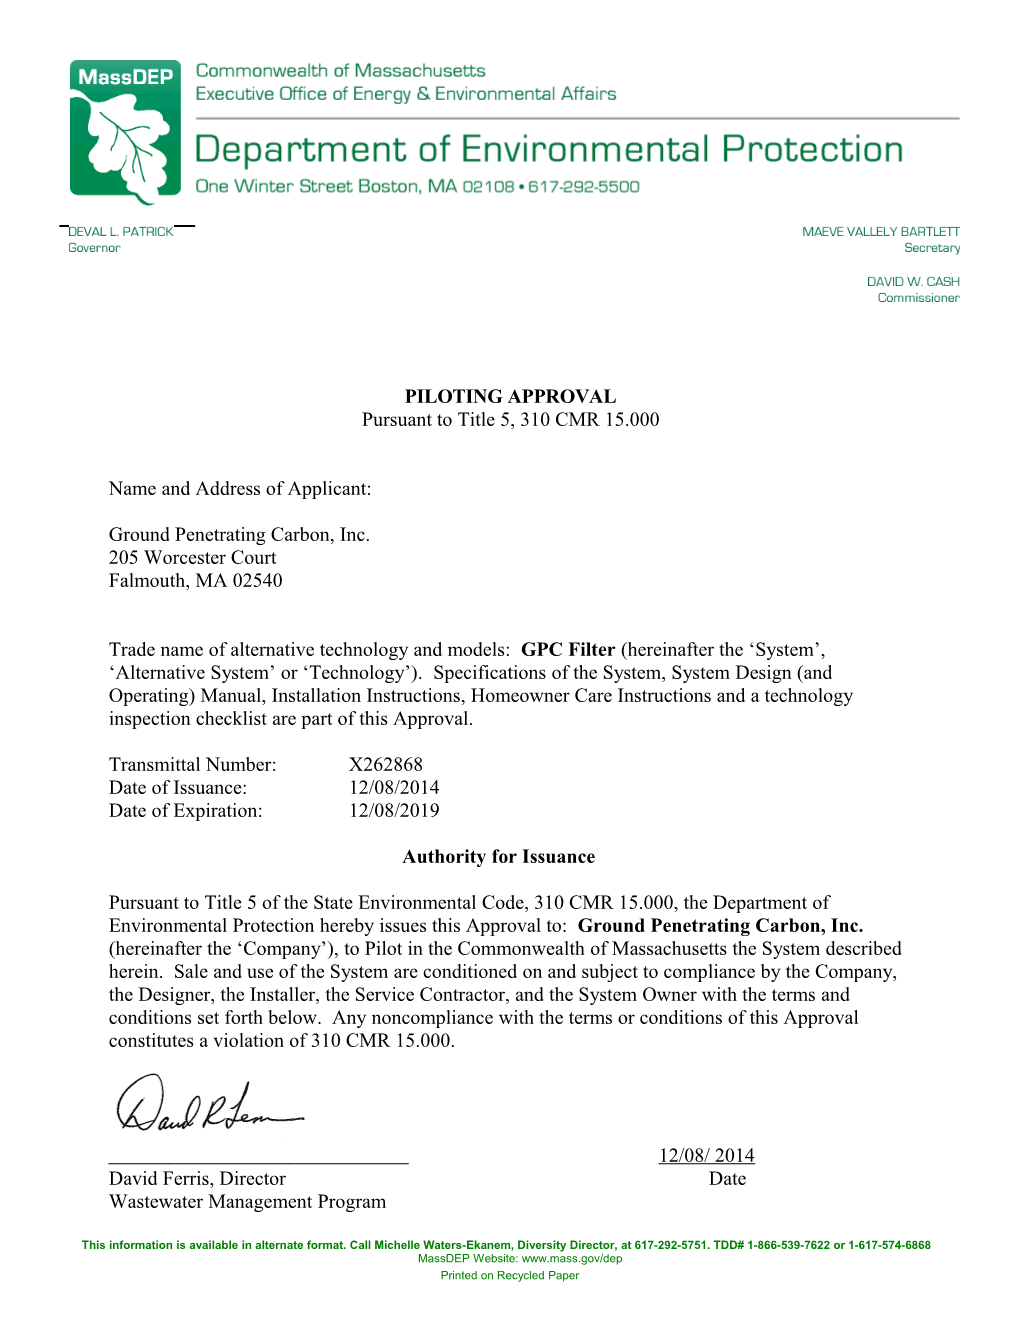 Pilot Approval Issued 12/08/2014Page 1 of 19